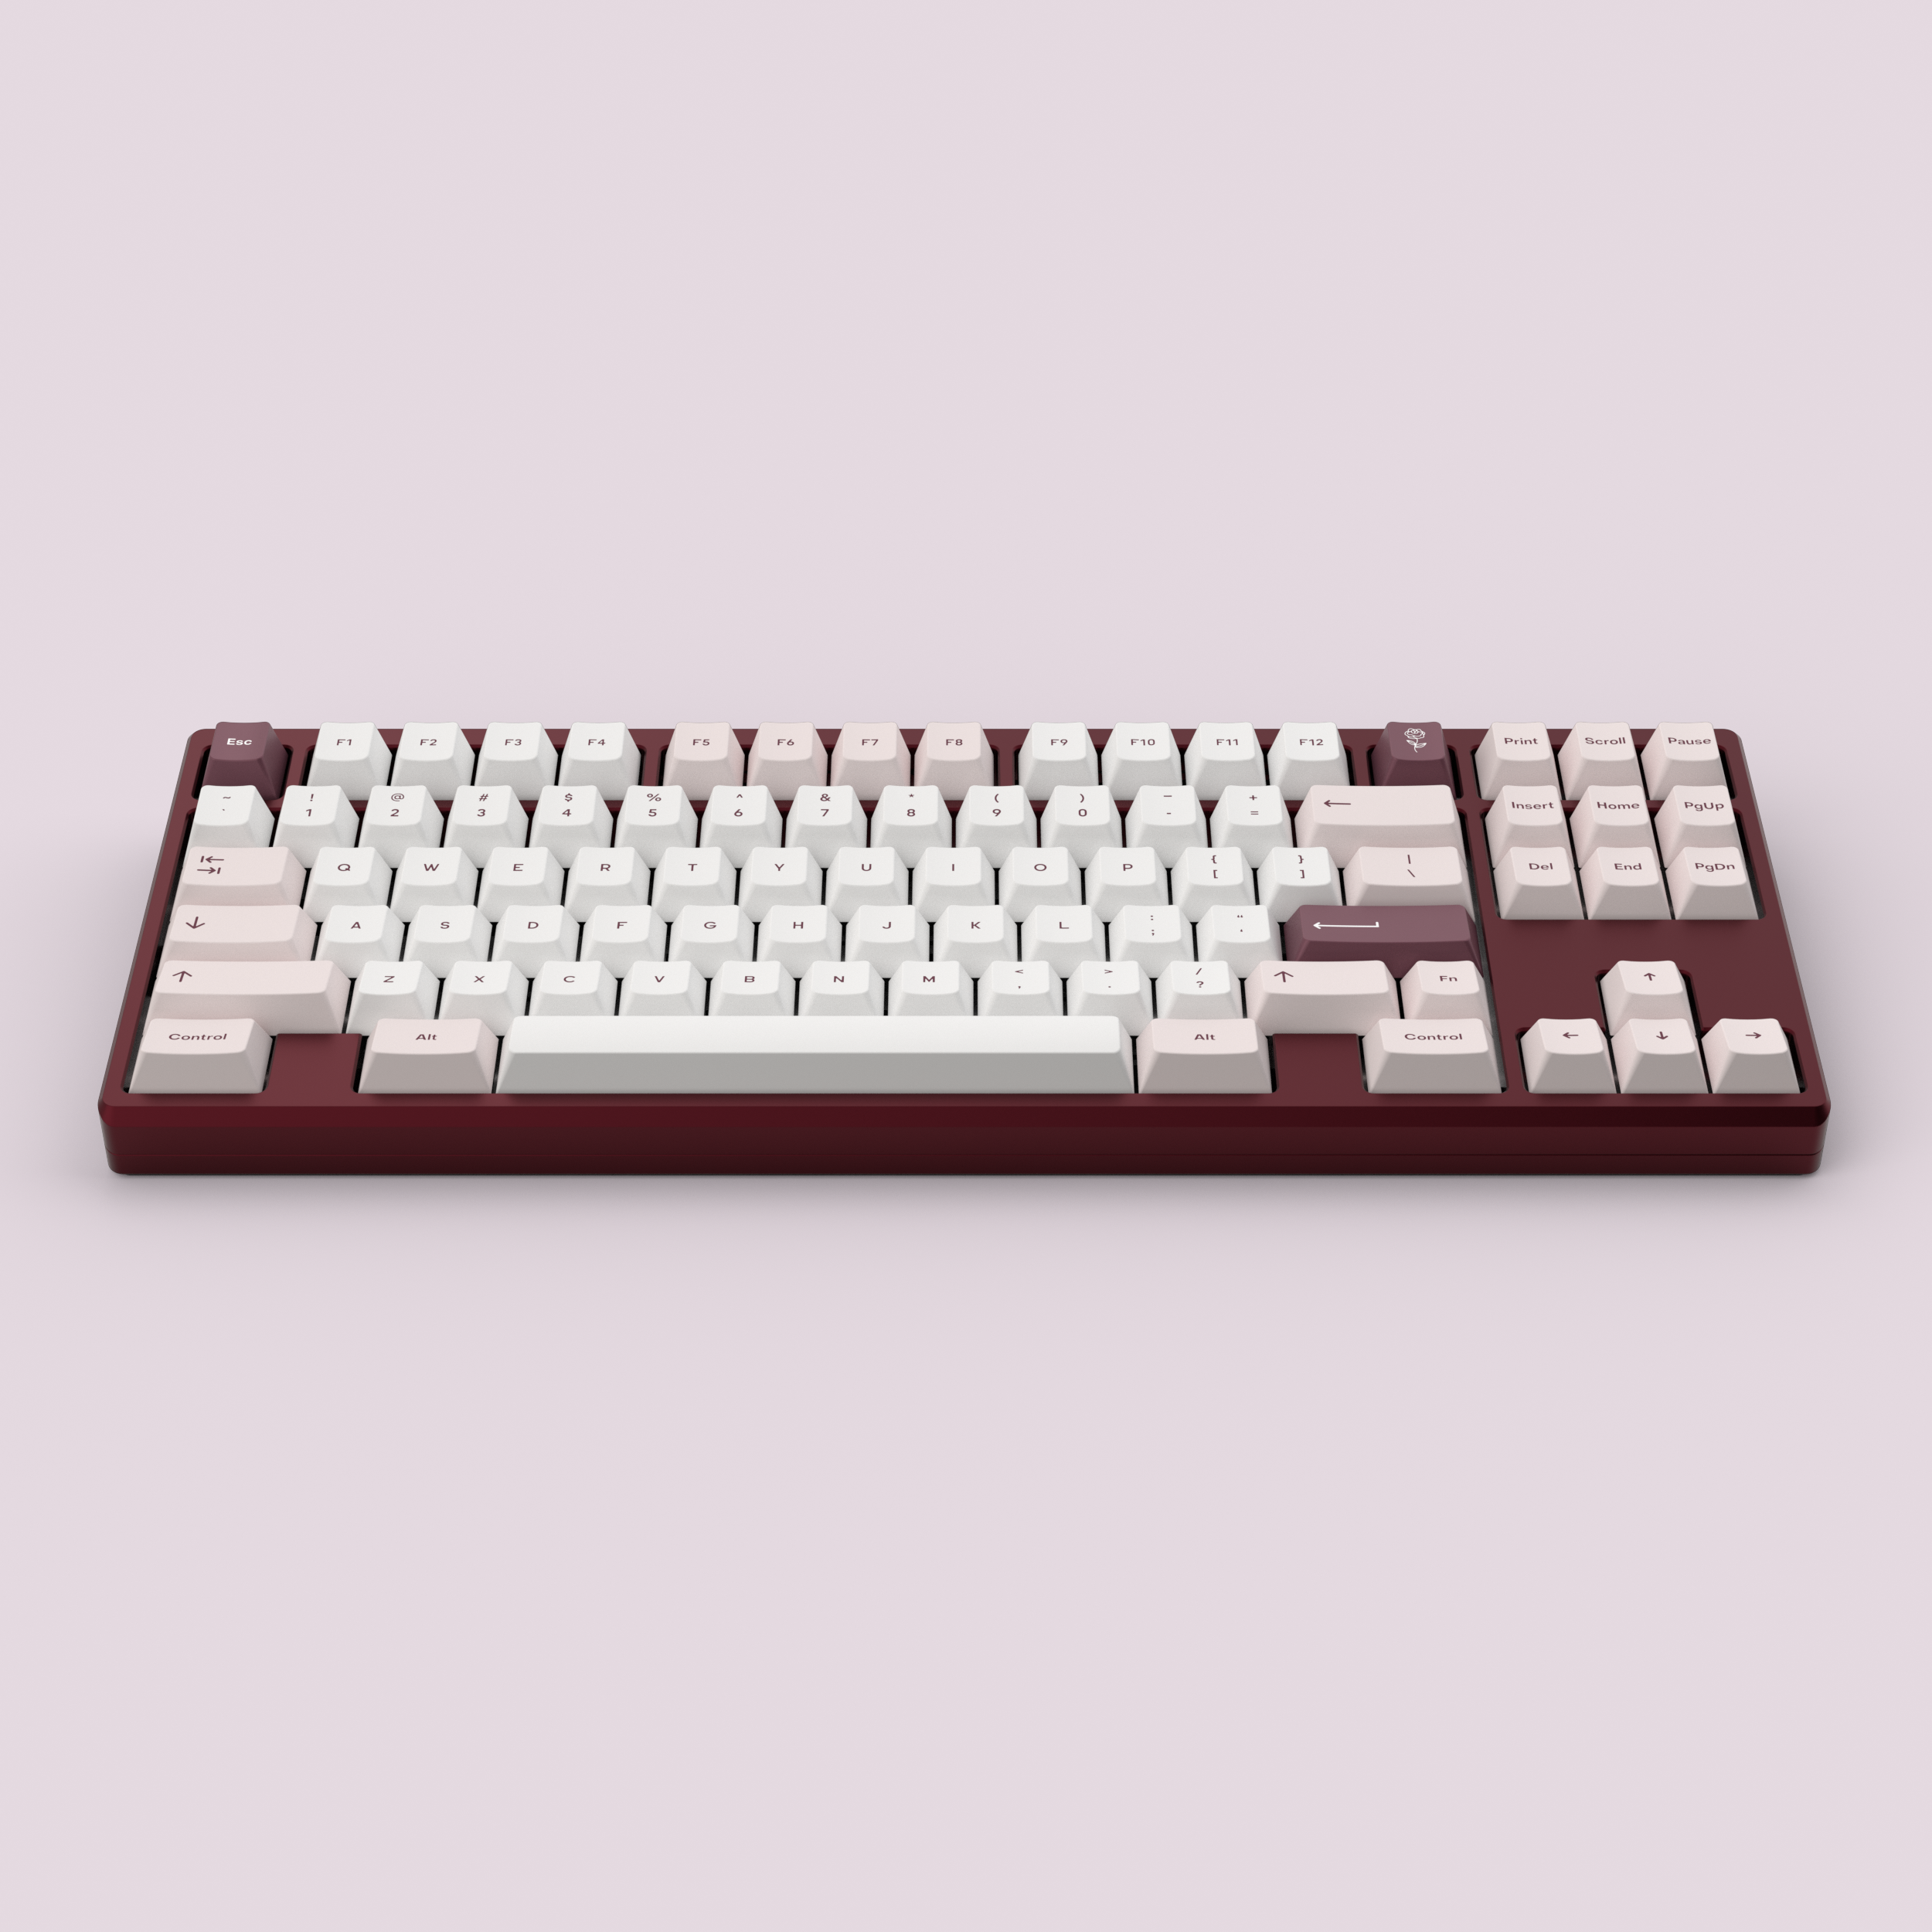 RENDER: Teacaps Rosewater keycaps on a burgundy Frog TKL keyboard against a pink background.